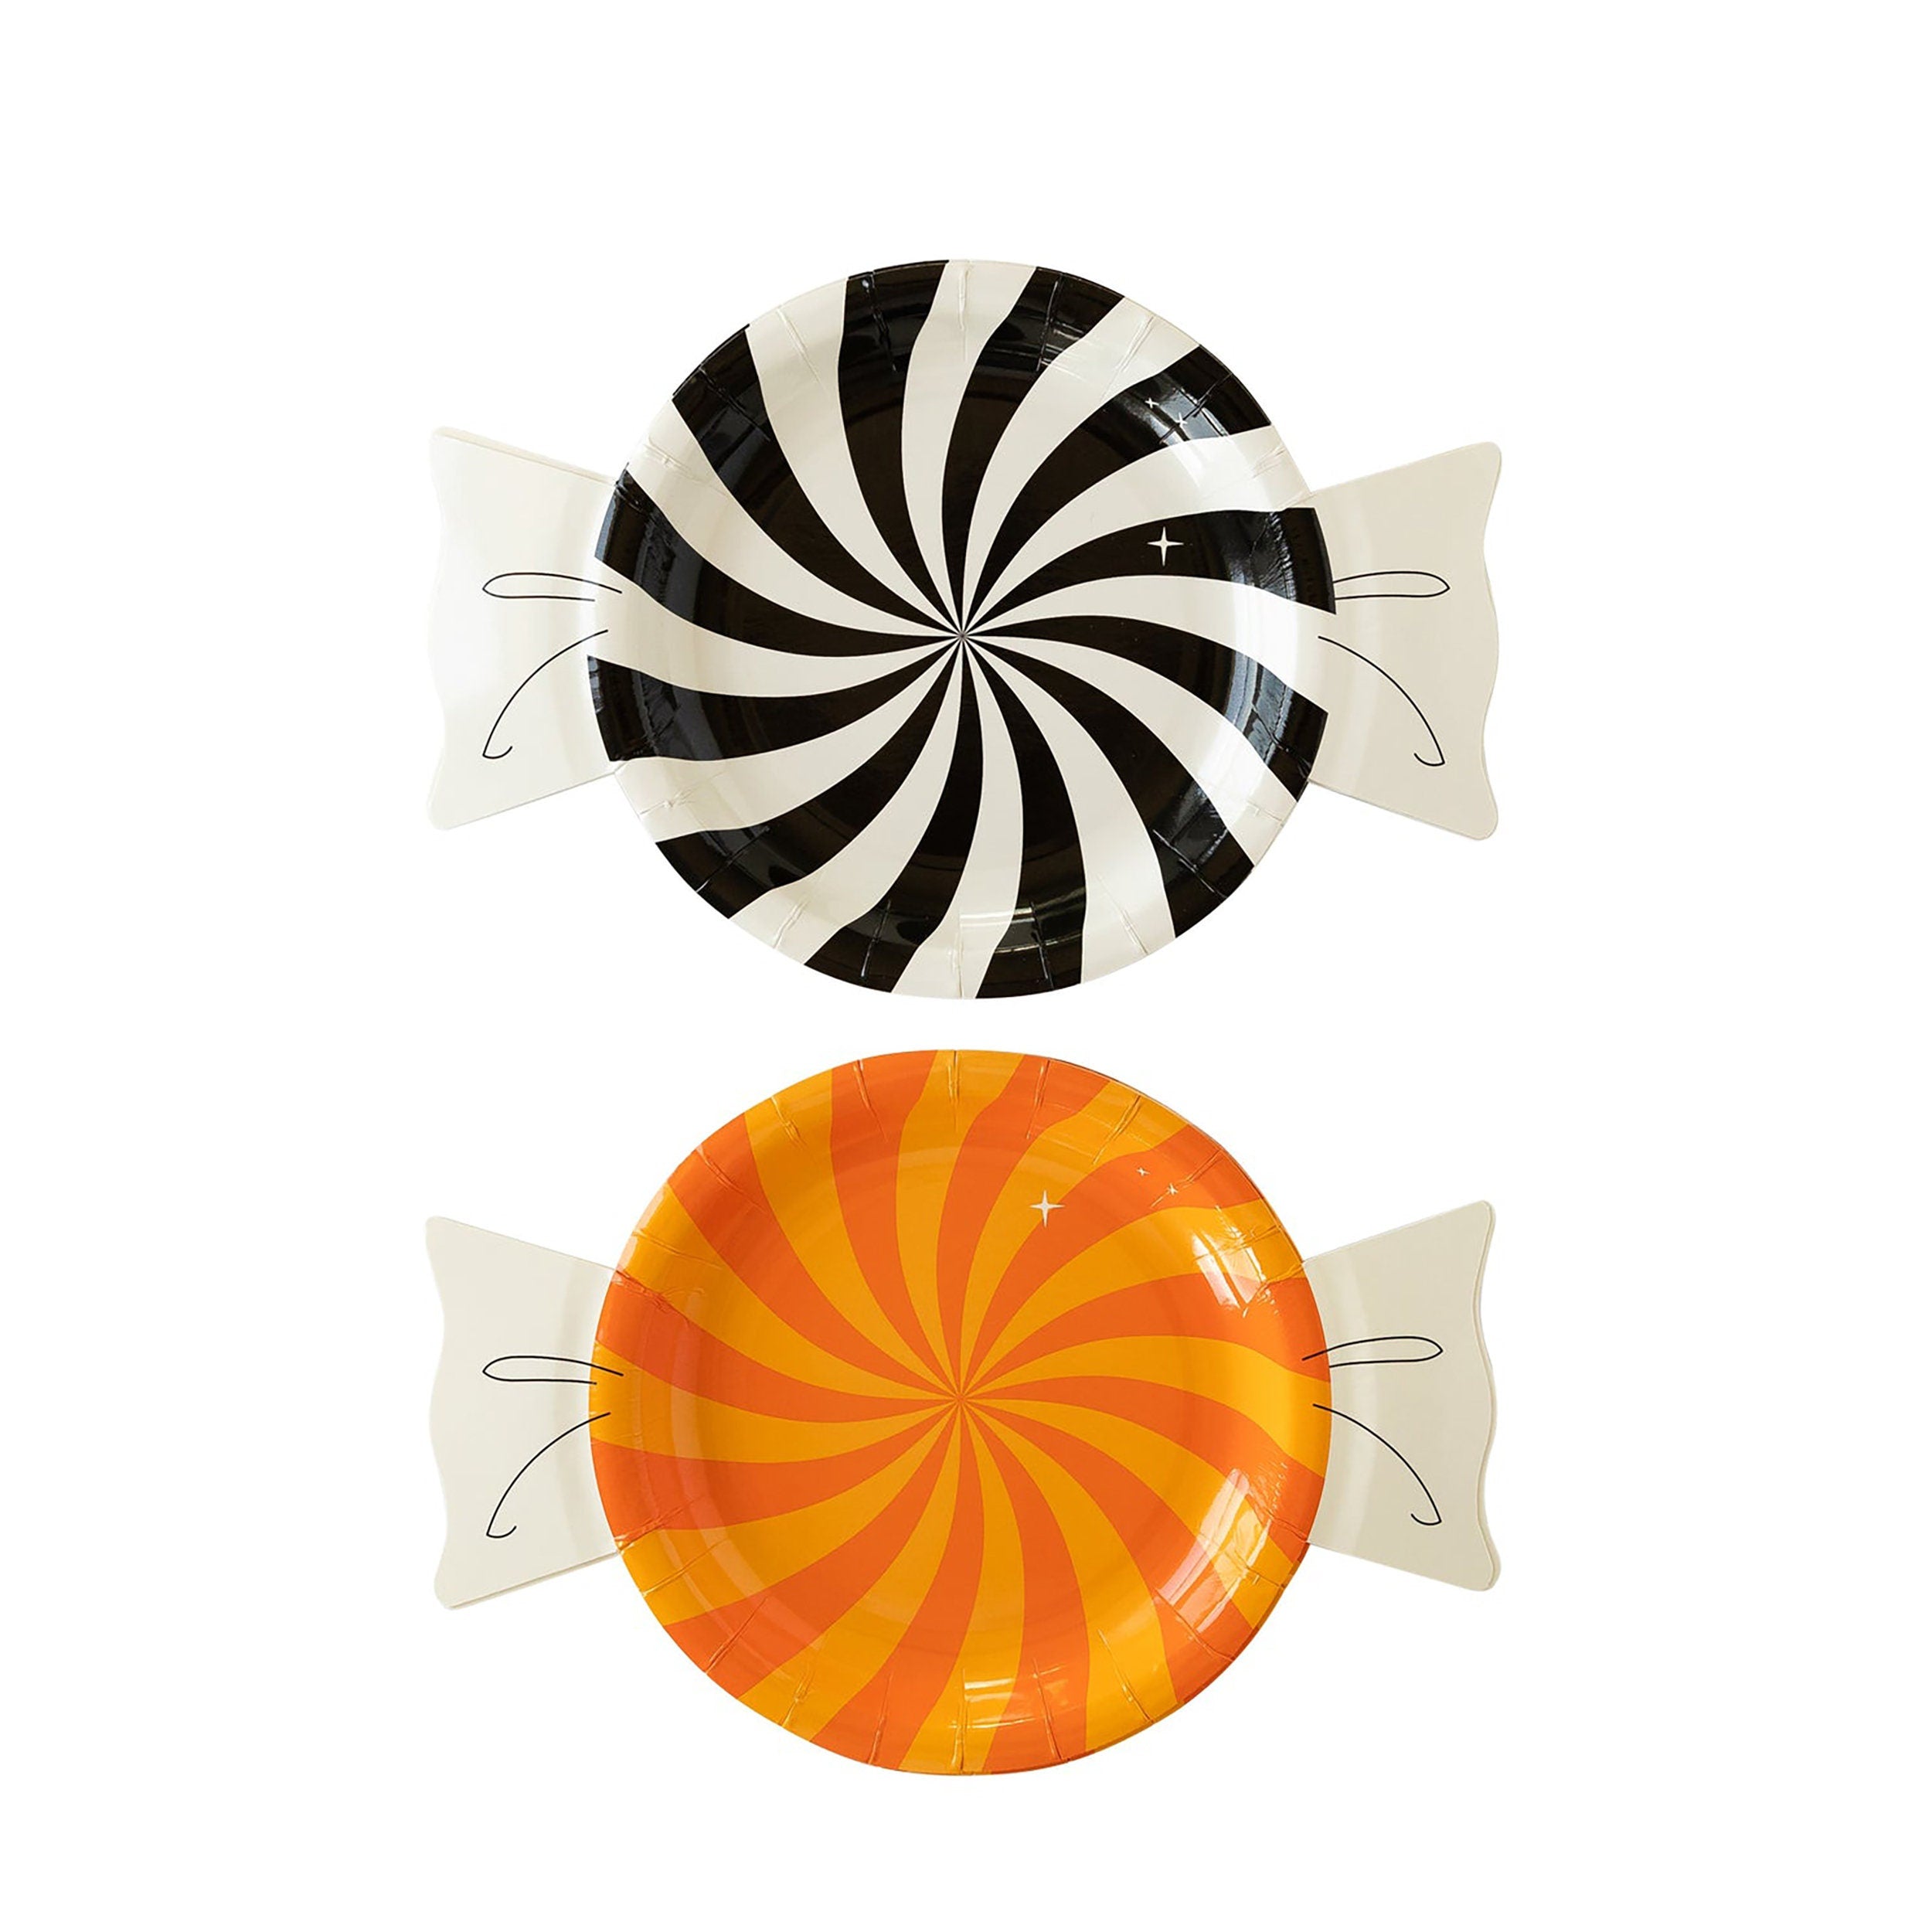 Halloween Candy Plates | Halloween Plates - Halloween Tableware - Candy Plates - Halloween Birthday Party - Halloween Party Plates